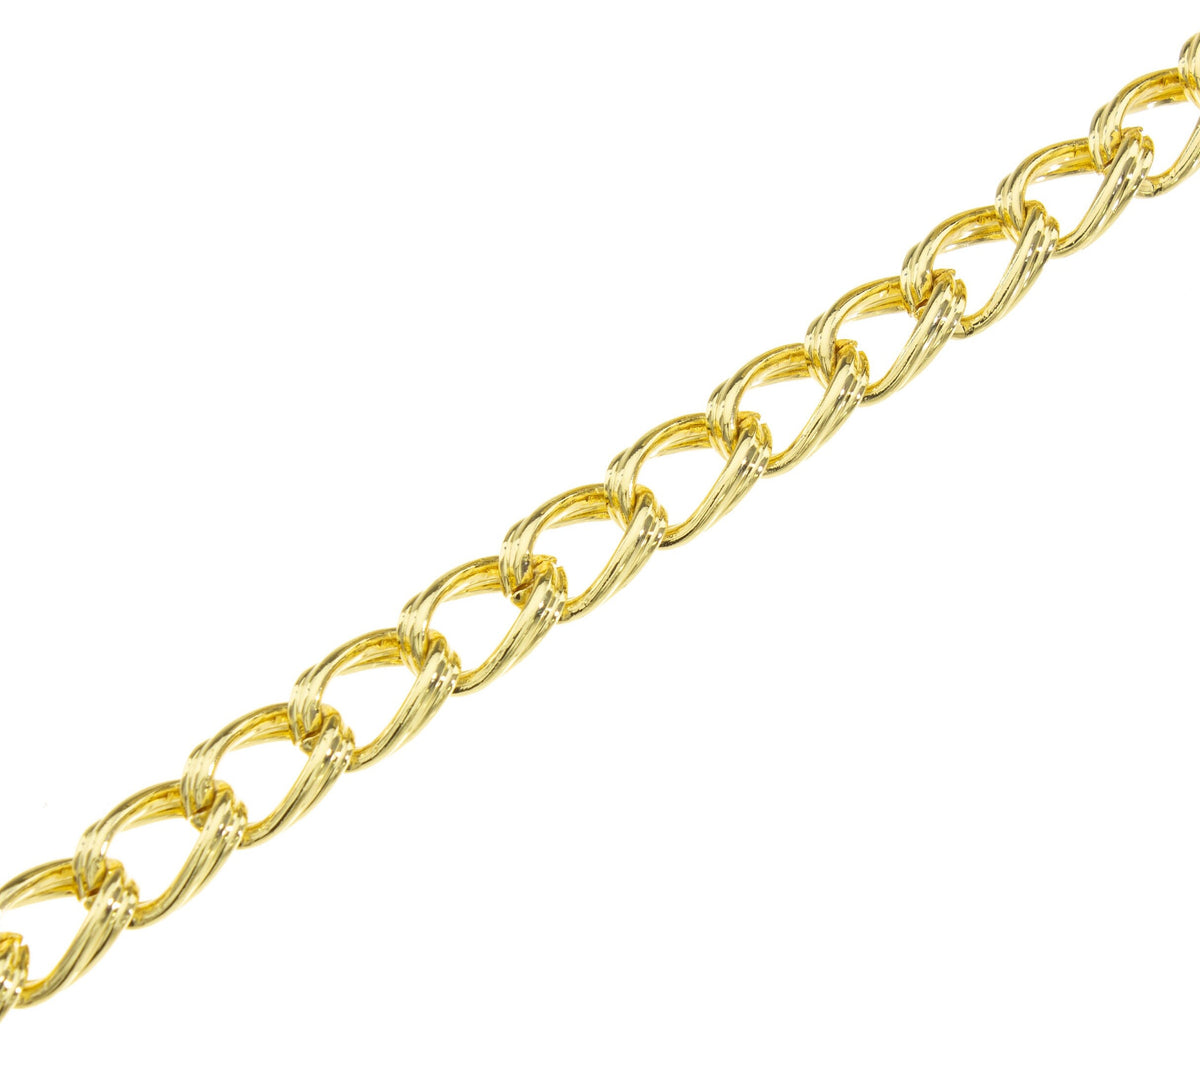 Gold Curb Chain, Curb Chain For Necklace And Bracelet,Curb Chain For Purse Strap,CHG020